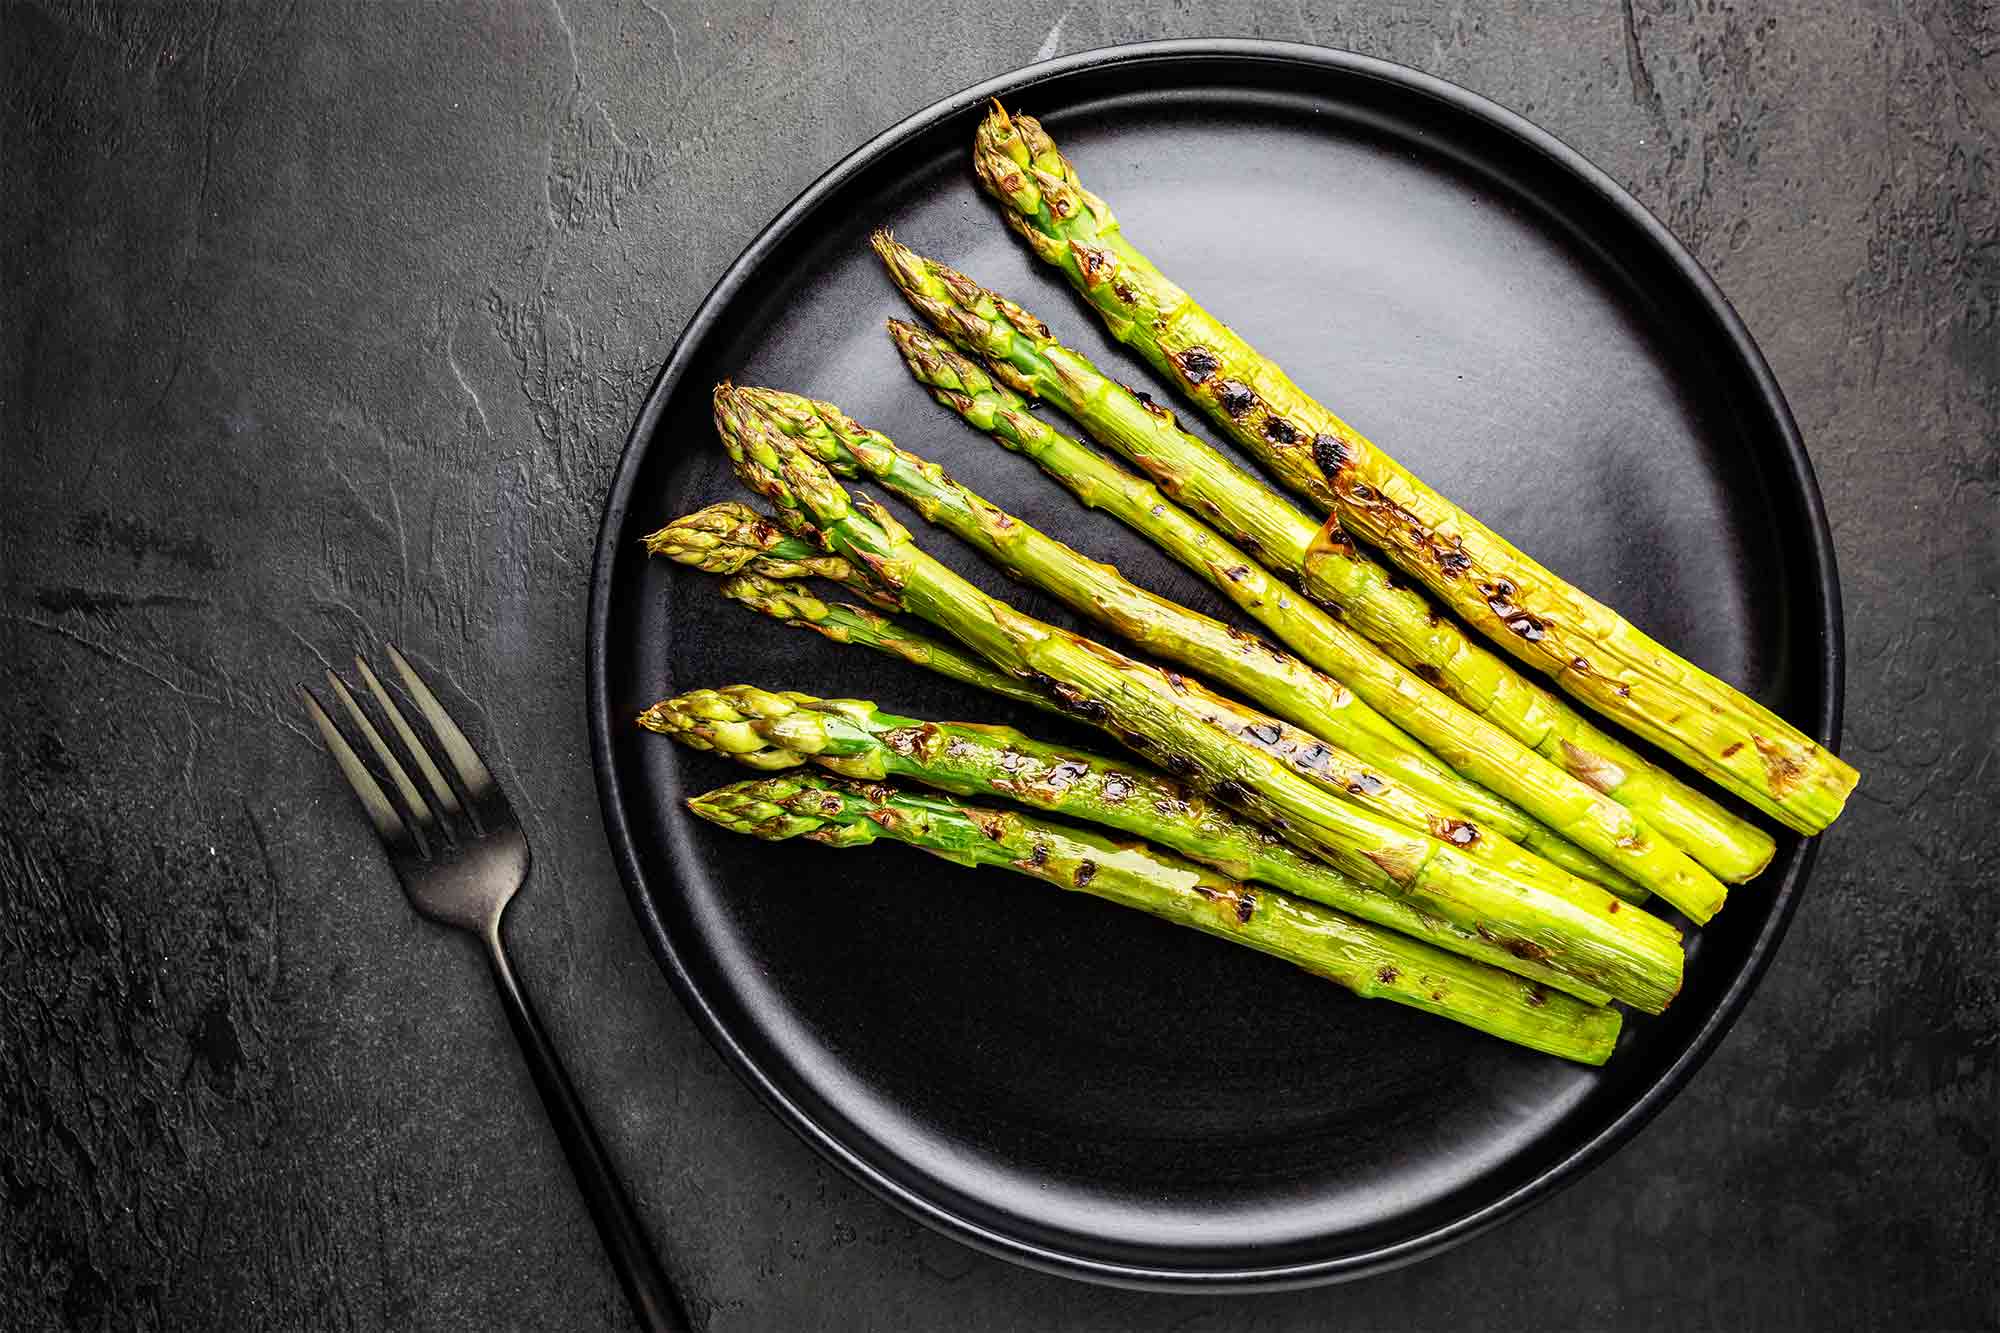 The Best Roasted Asparagus - How To Make Recipes